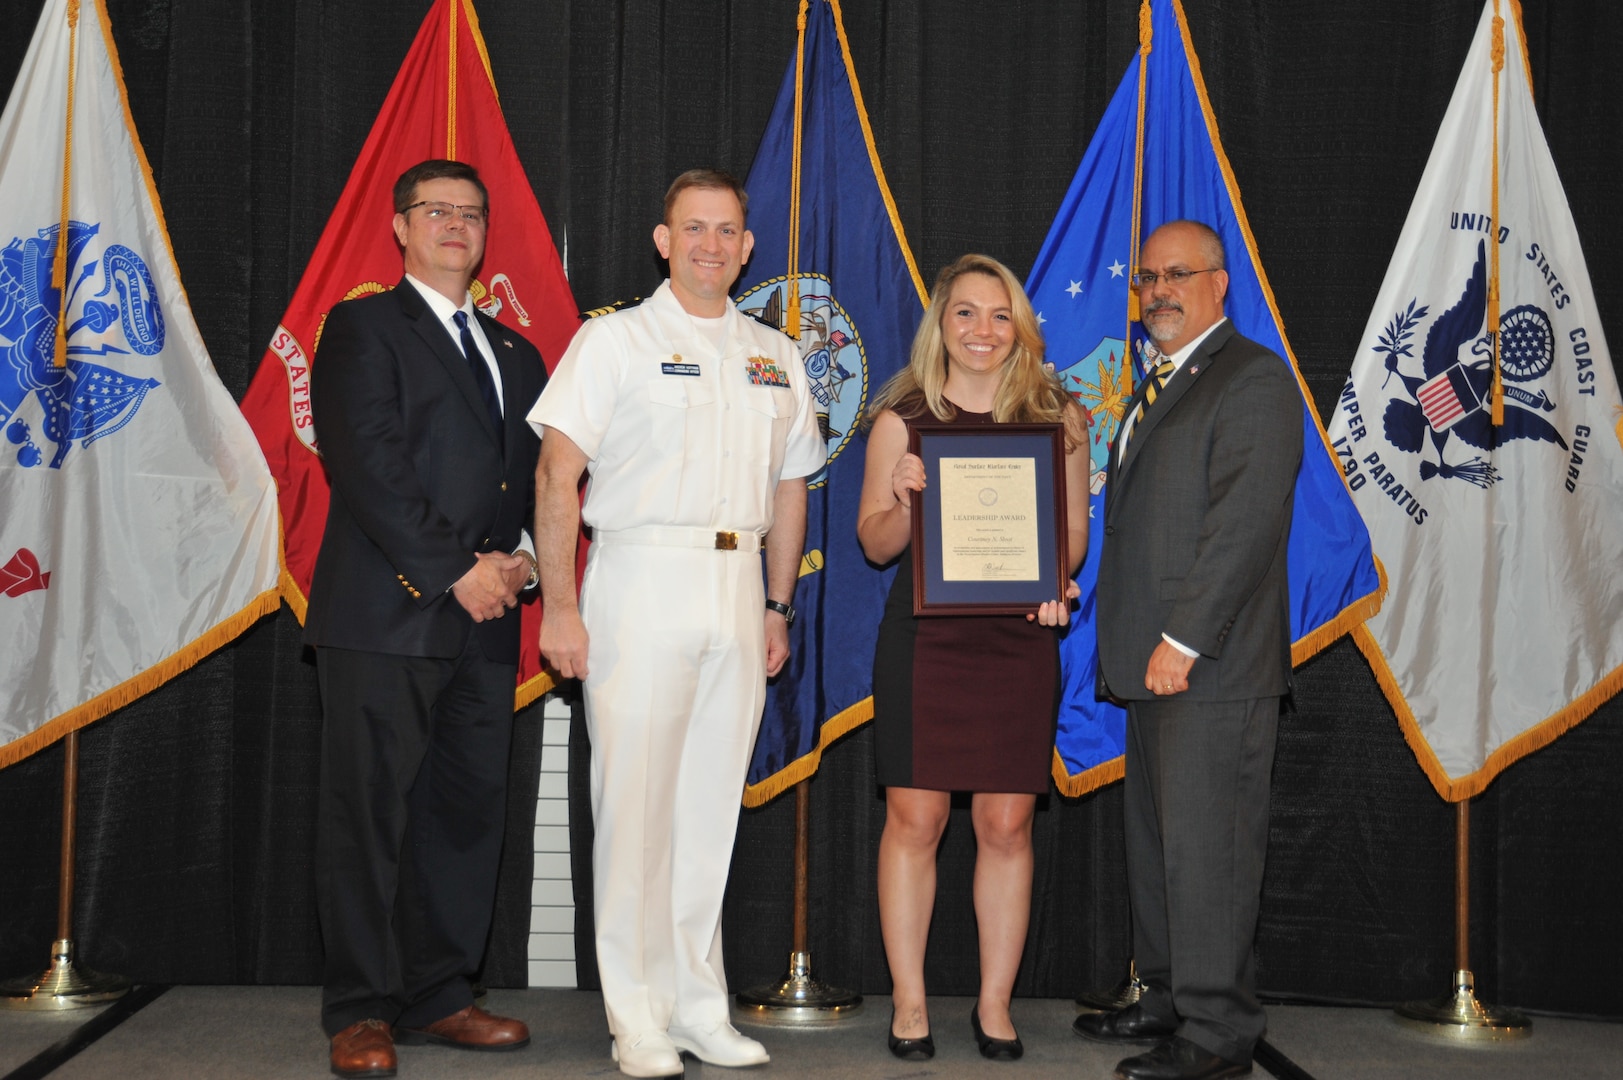 IMAGE: Courtney Sloat is presented the Leadership Award at Naval Surface Warfare Center Dahlgren Division's annual awards ceremony, Apr. 26 at the Fredericksburg Expo and Conference Center.